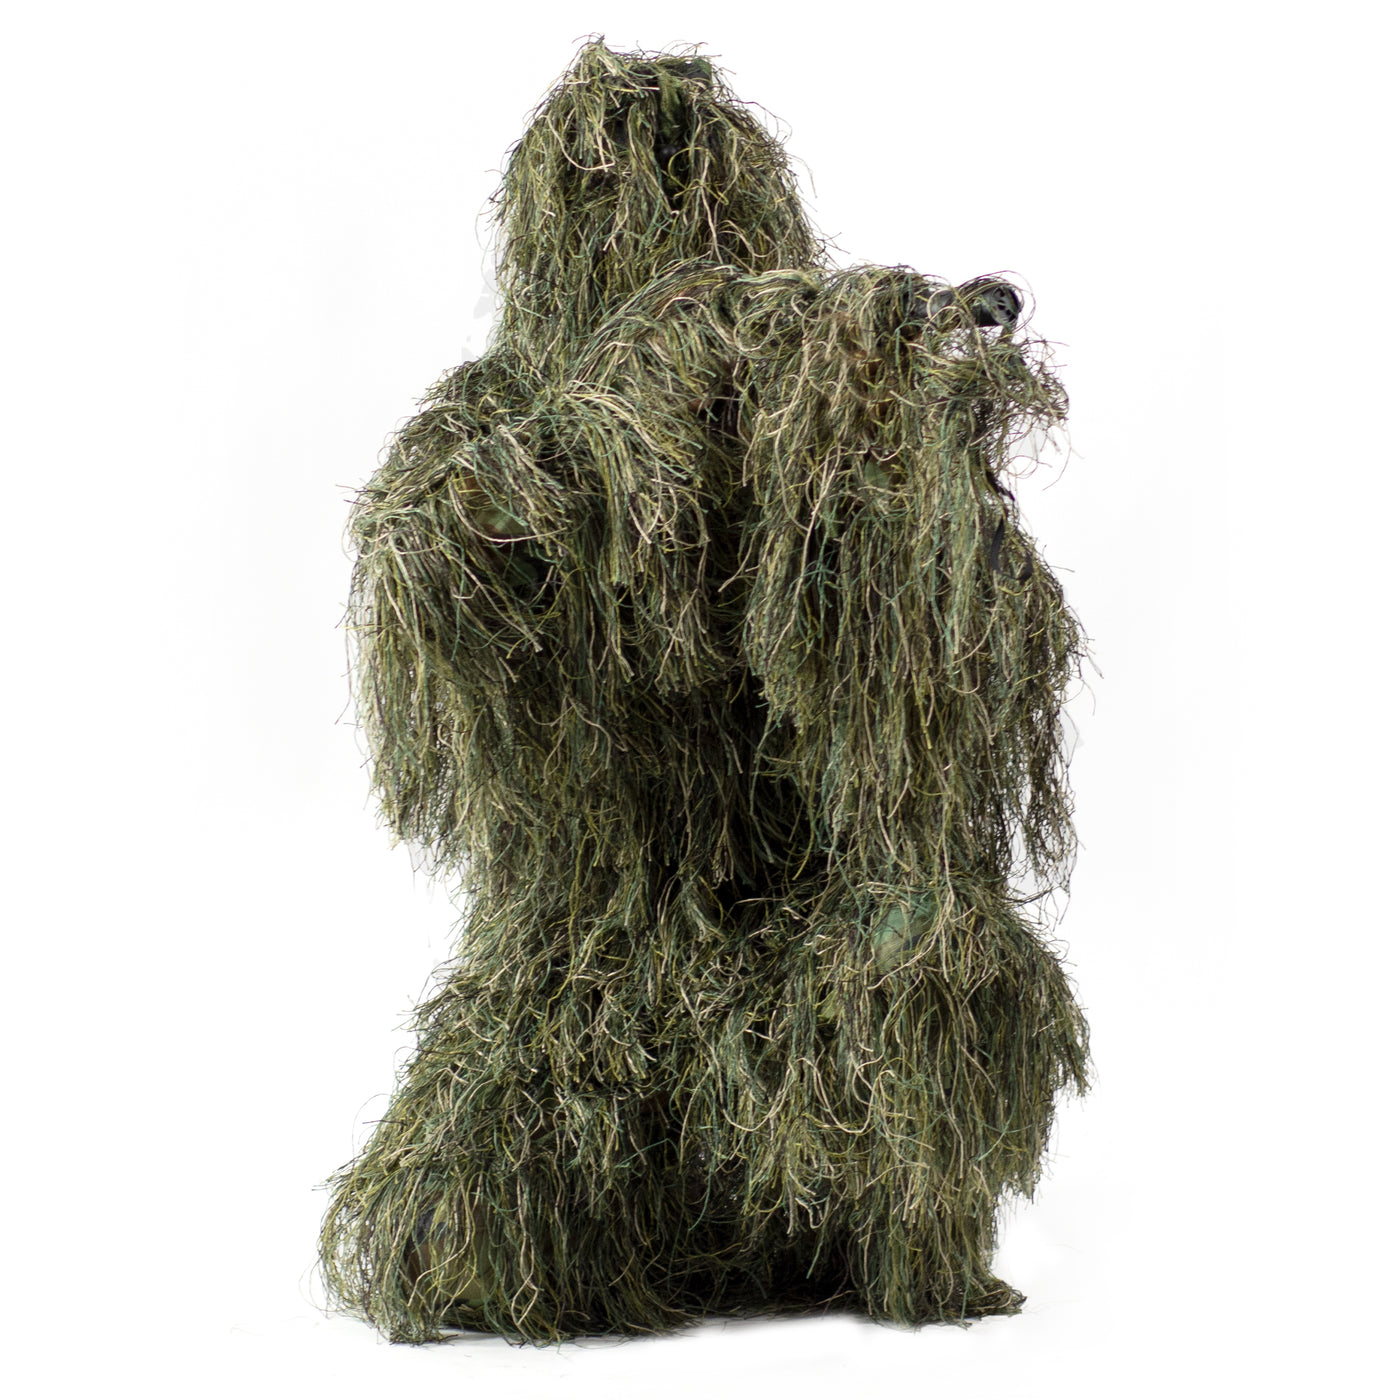 Ghillie suit from VIVO.